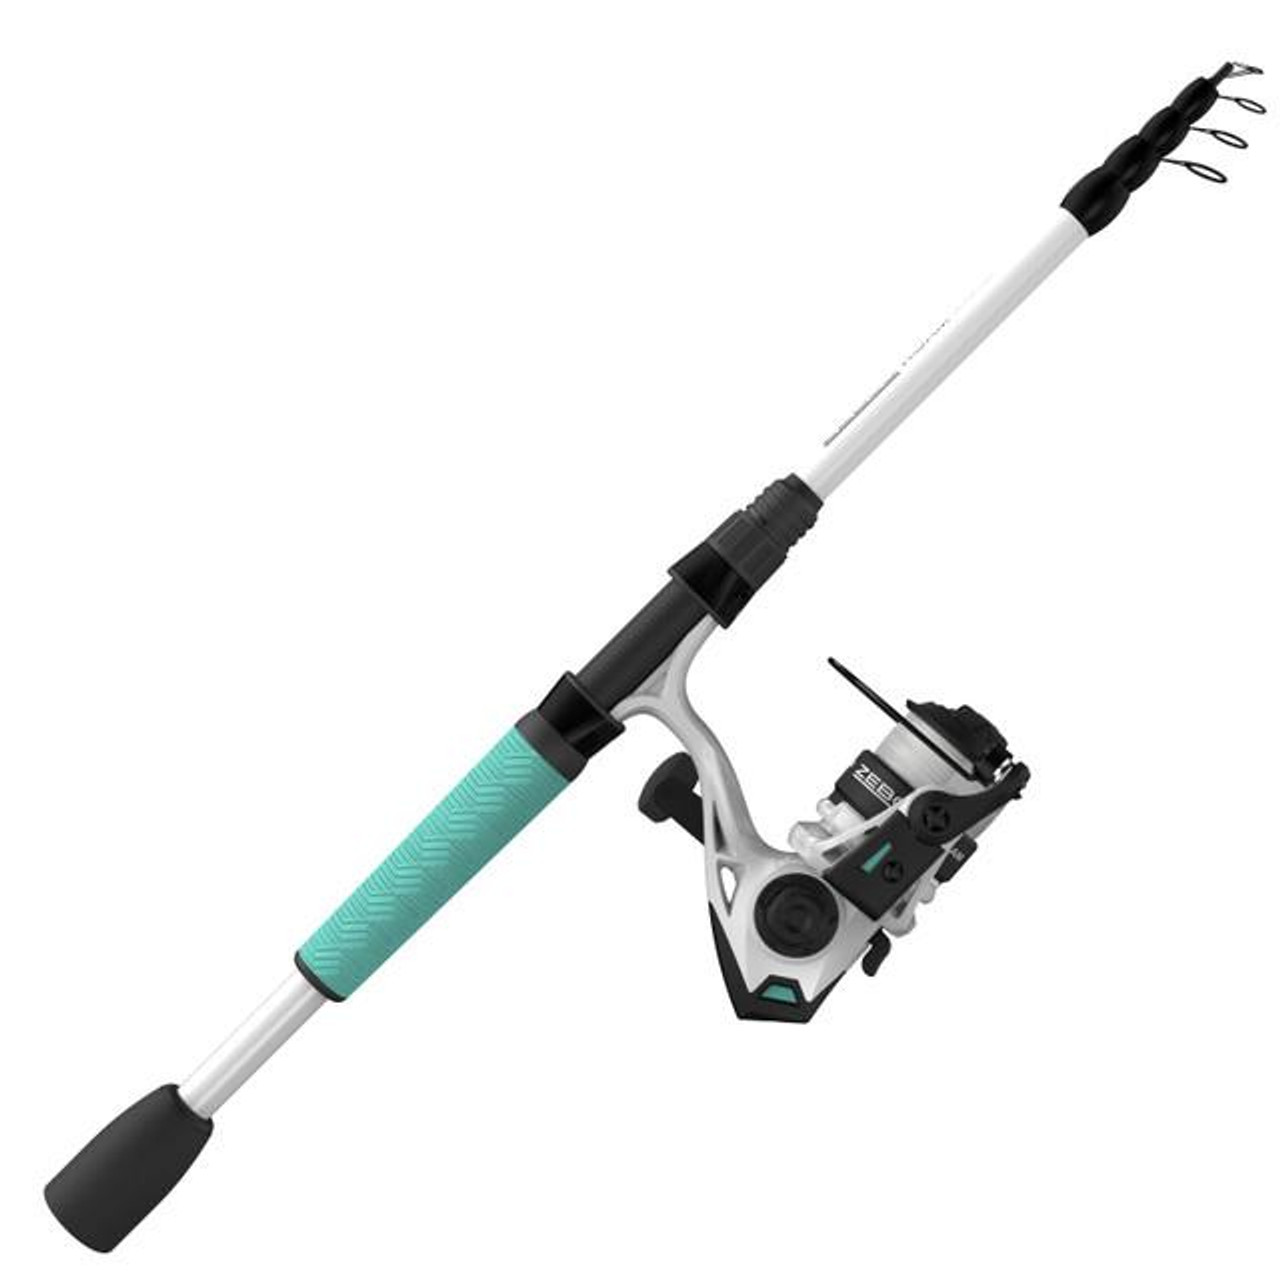 Zebco Roam Spinning Reel and Telescopic Fishing Rod Combo